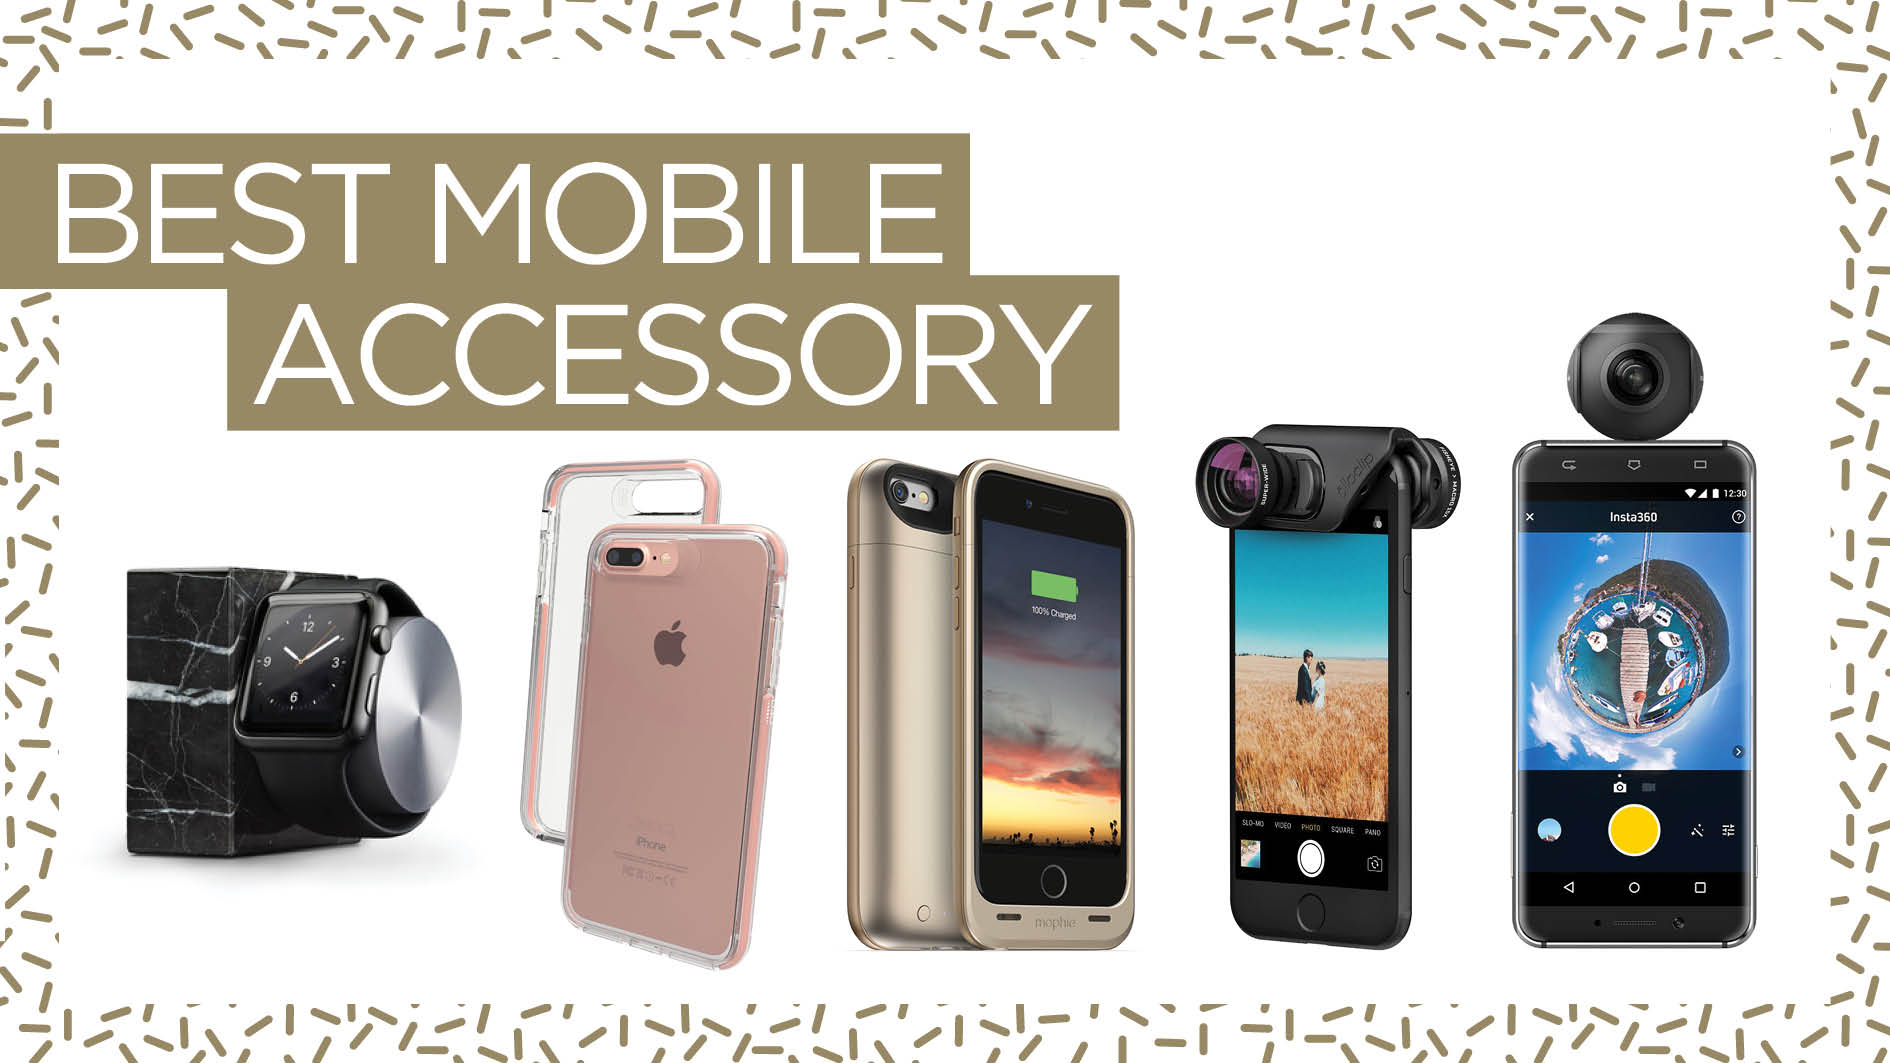 T3 Awards 17 Together With Three Best Mobile Accessory T3